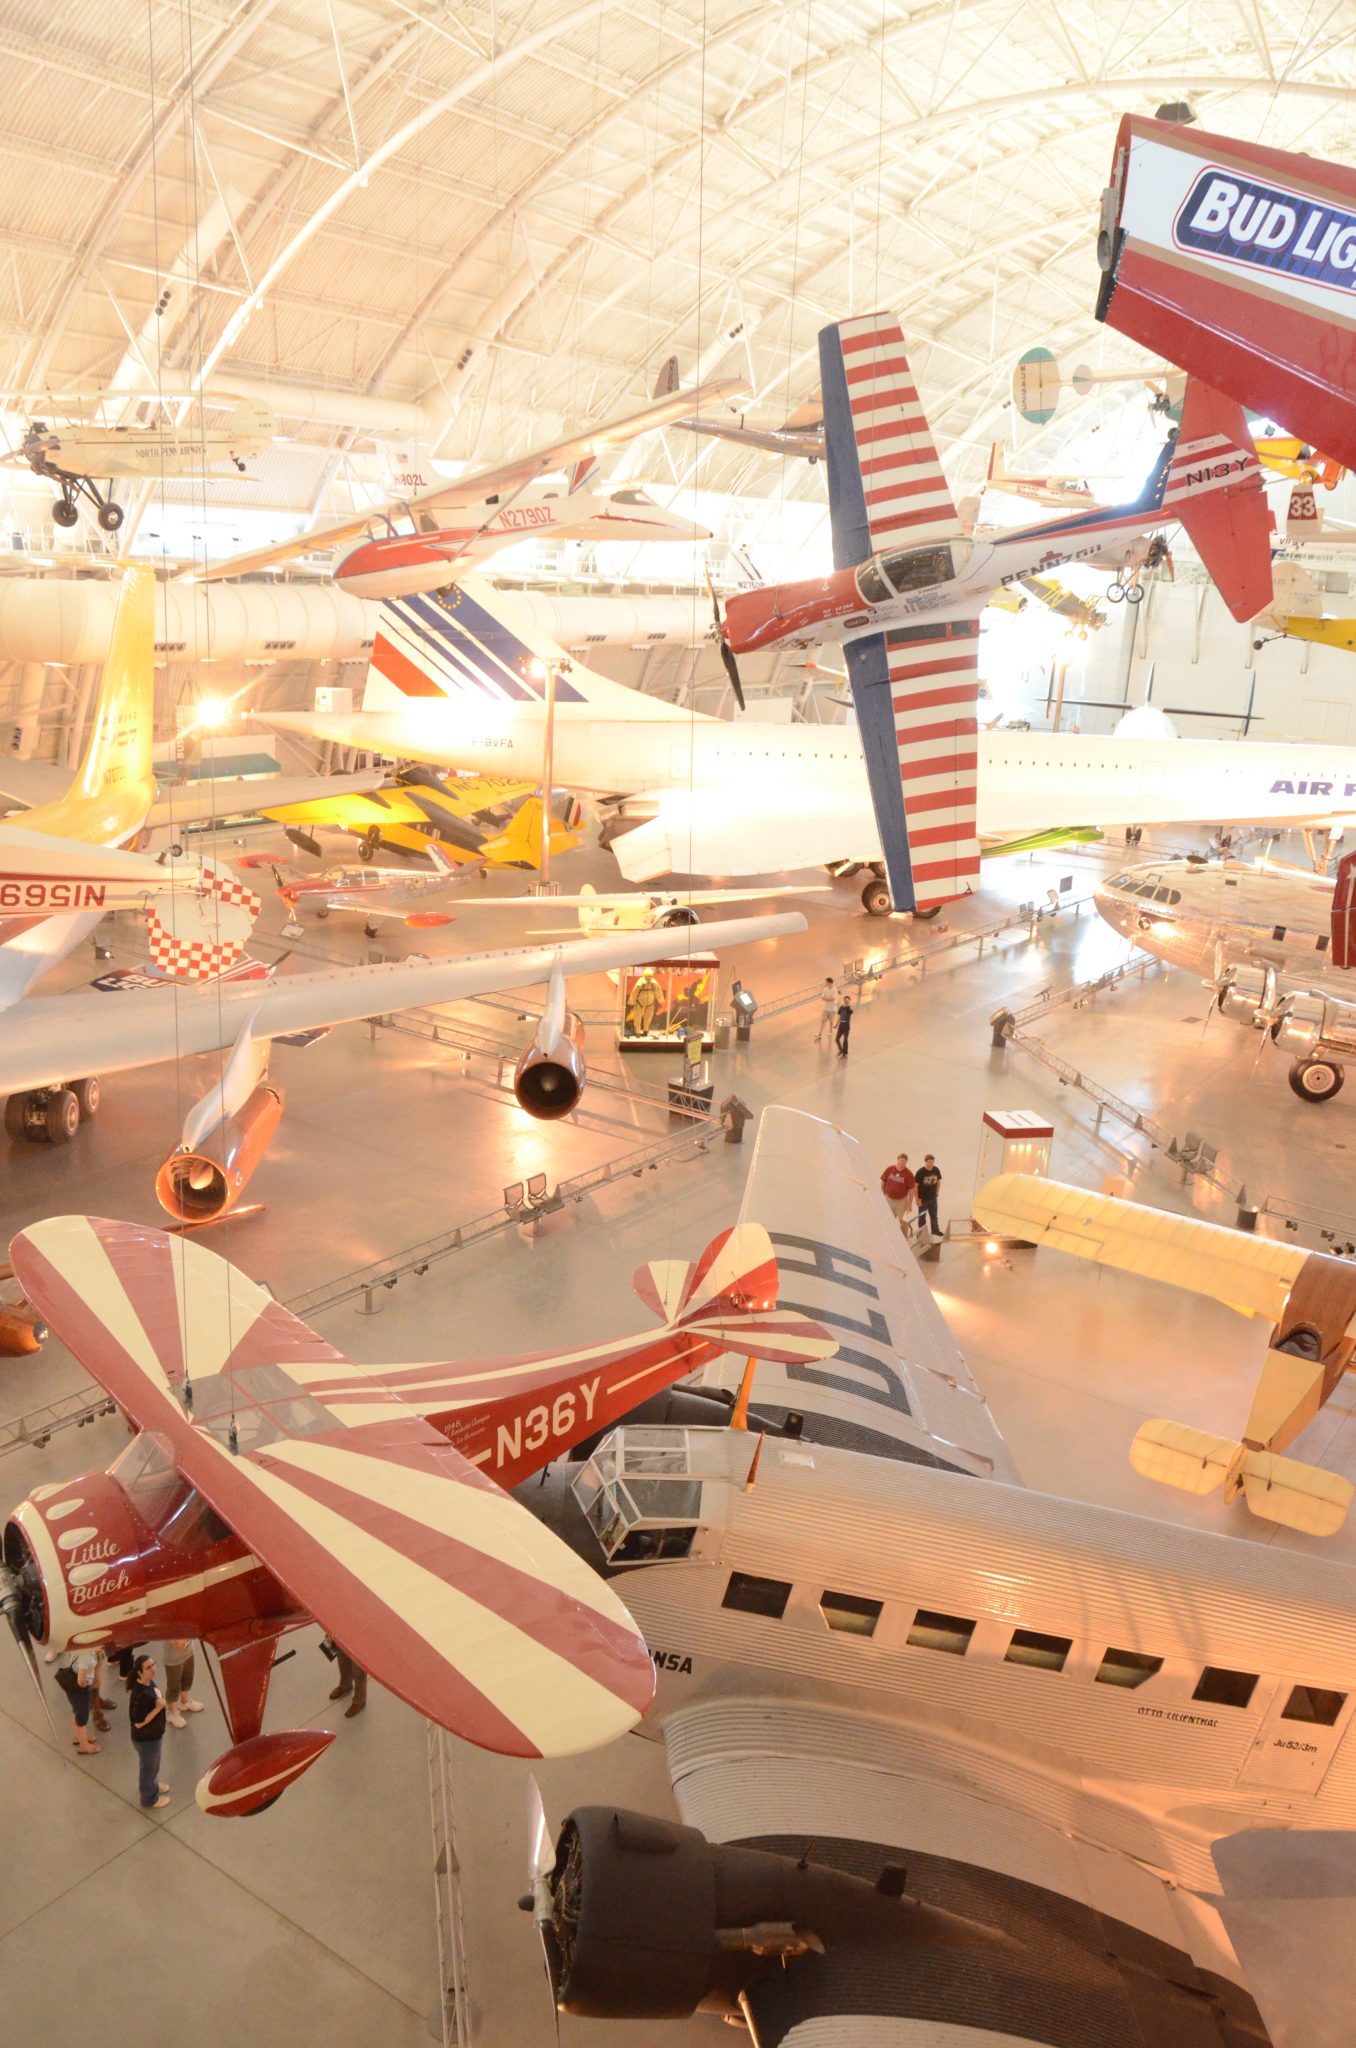 Steven F. Udvar-Hazy Center: South hangar panorama, including stunt planes (DHC-1A Chipmunk, Monocoupe 110 Special, etc) hanging over the Concorde, among others